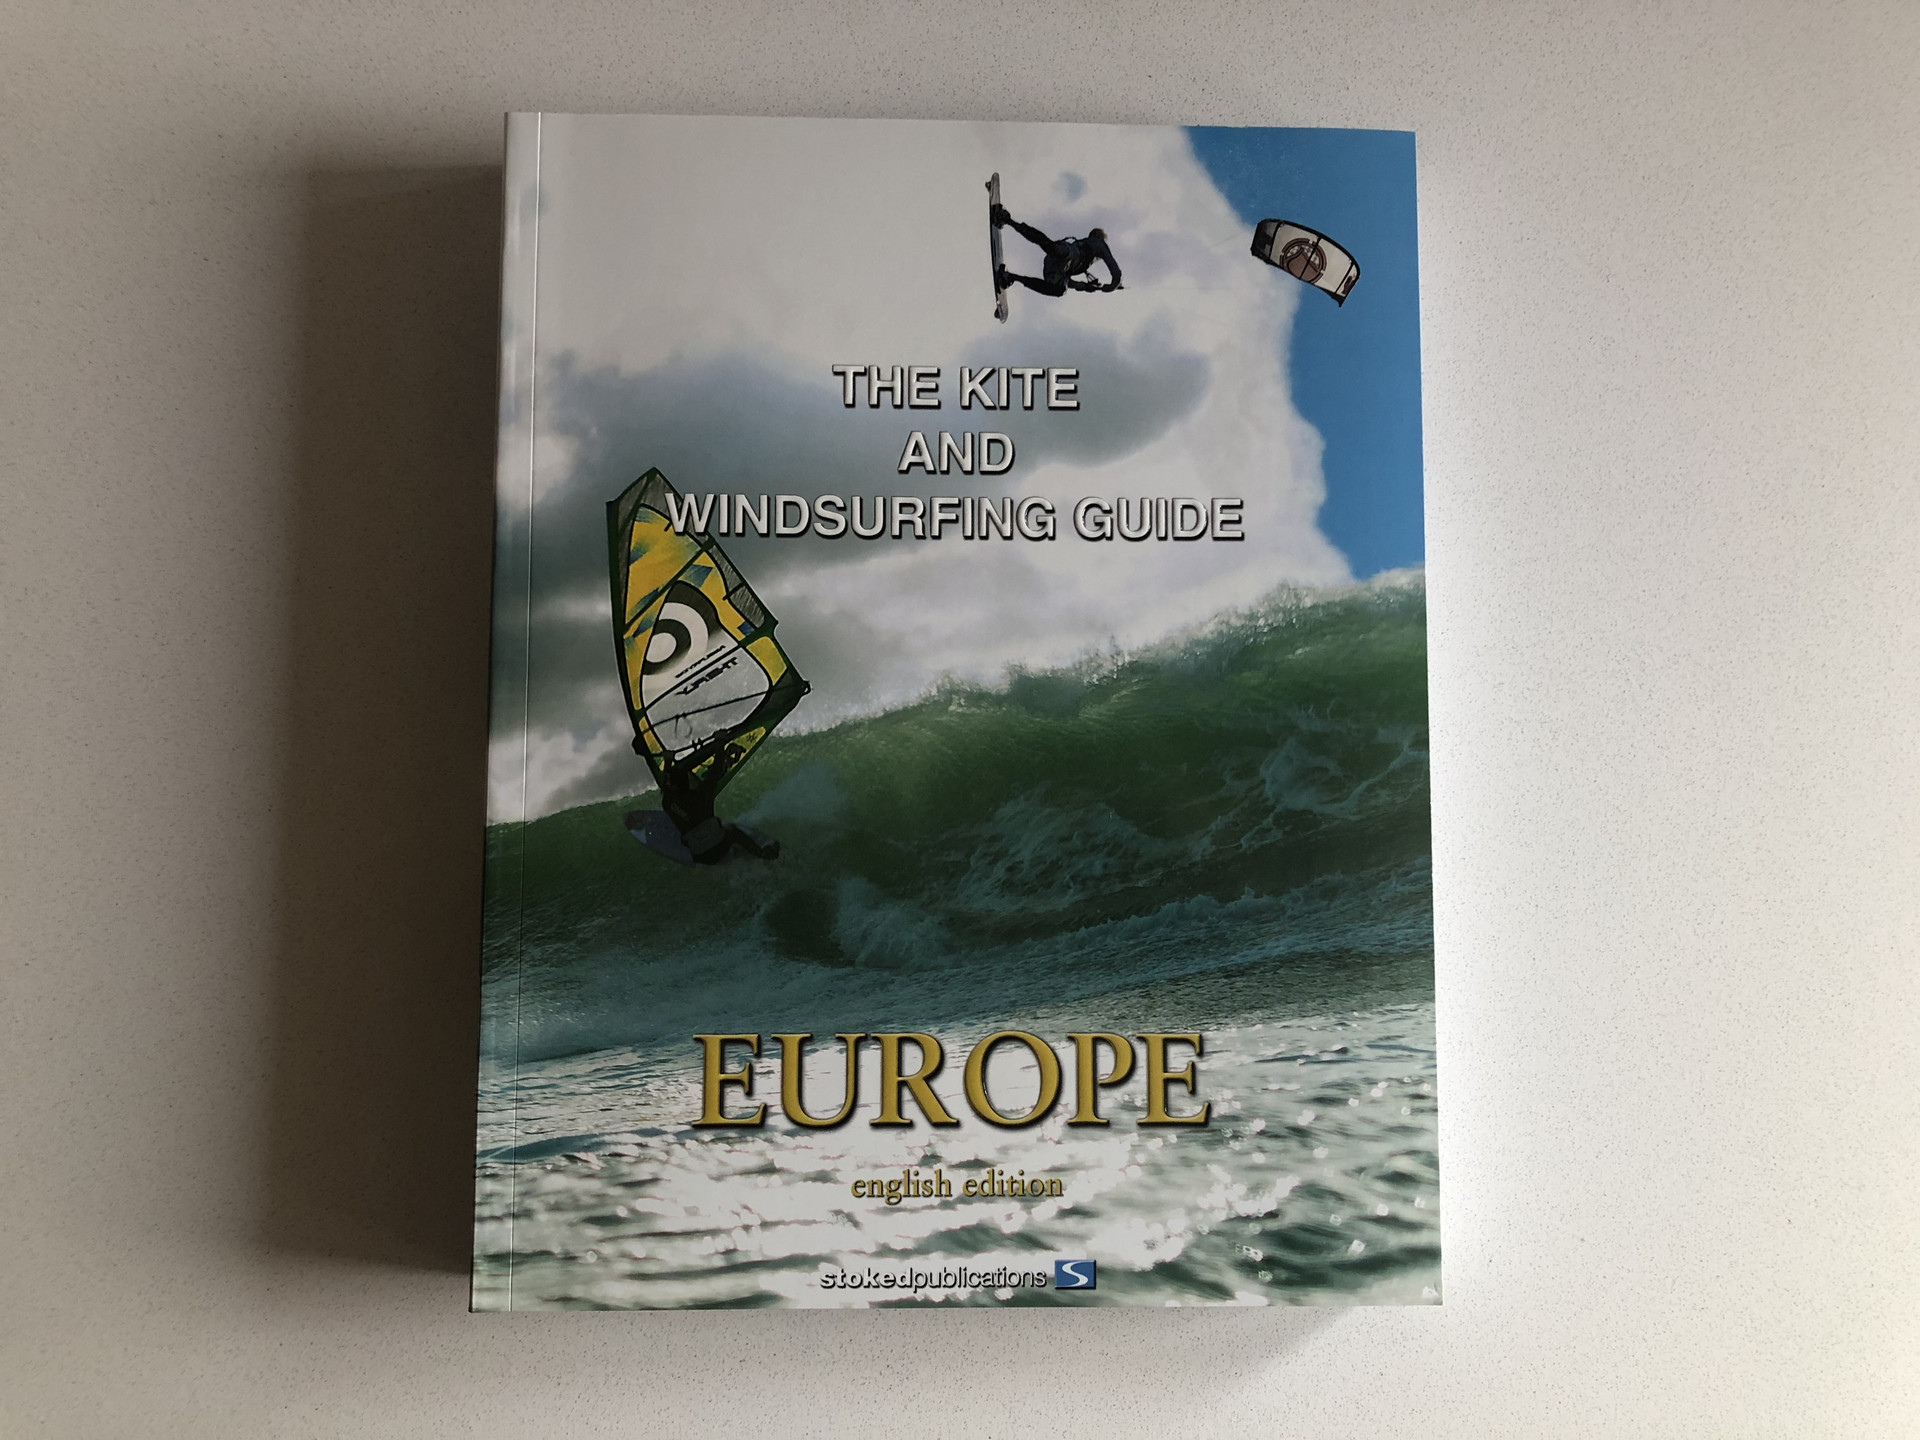 Windsurfing and kiteguide